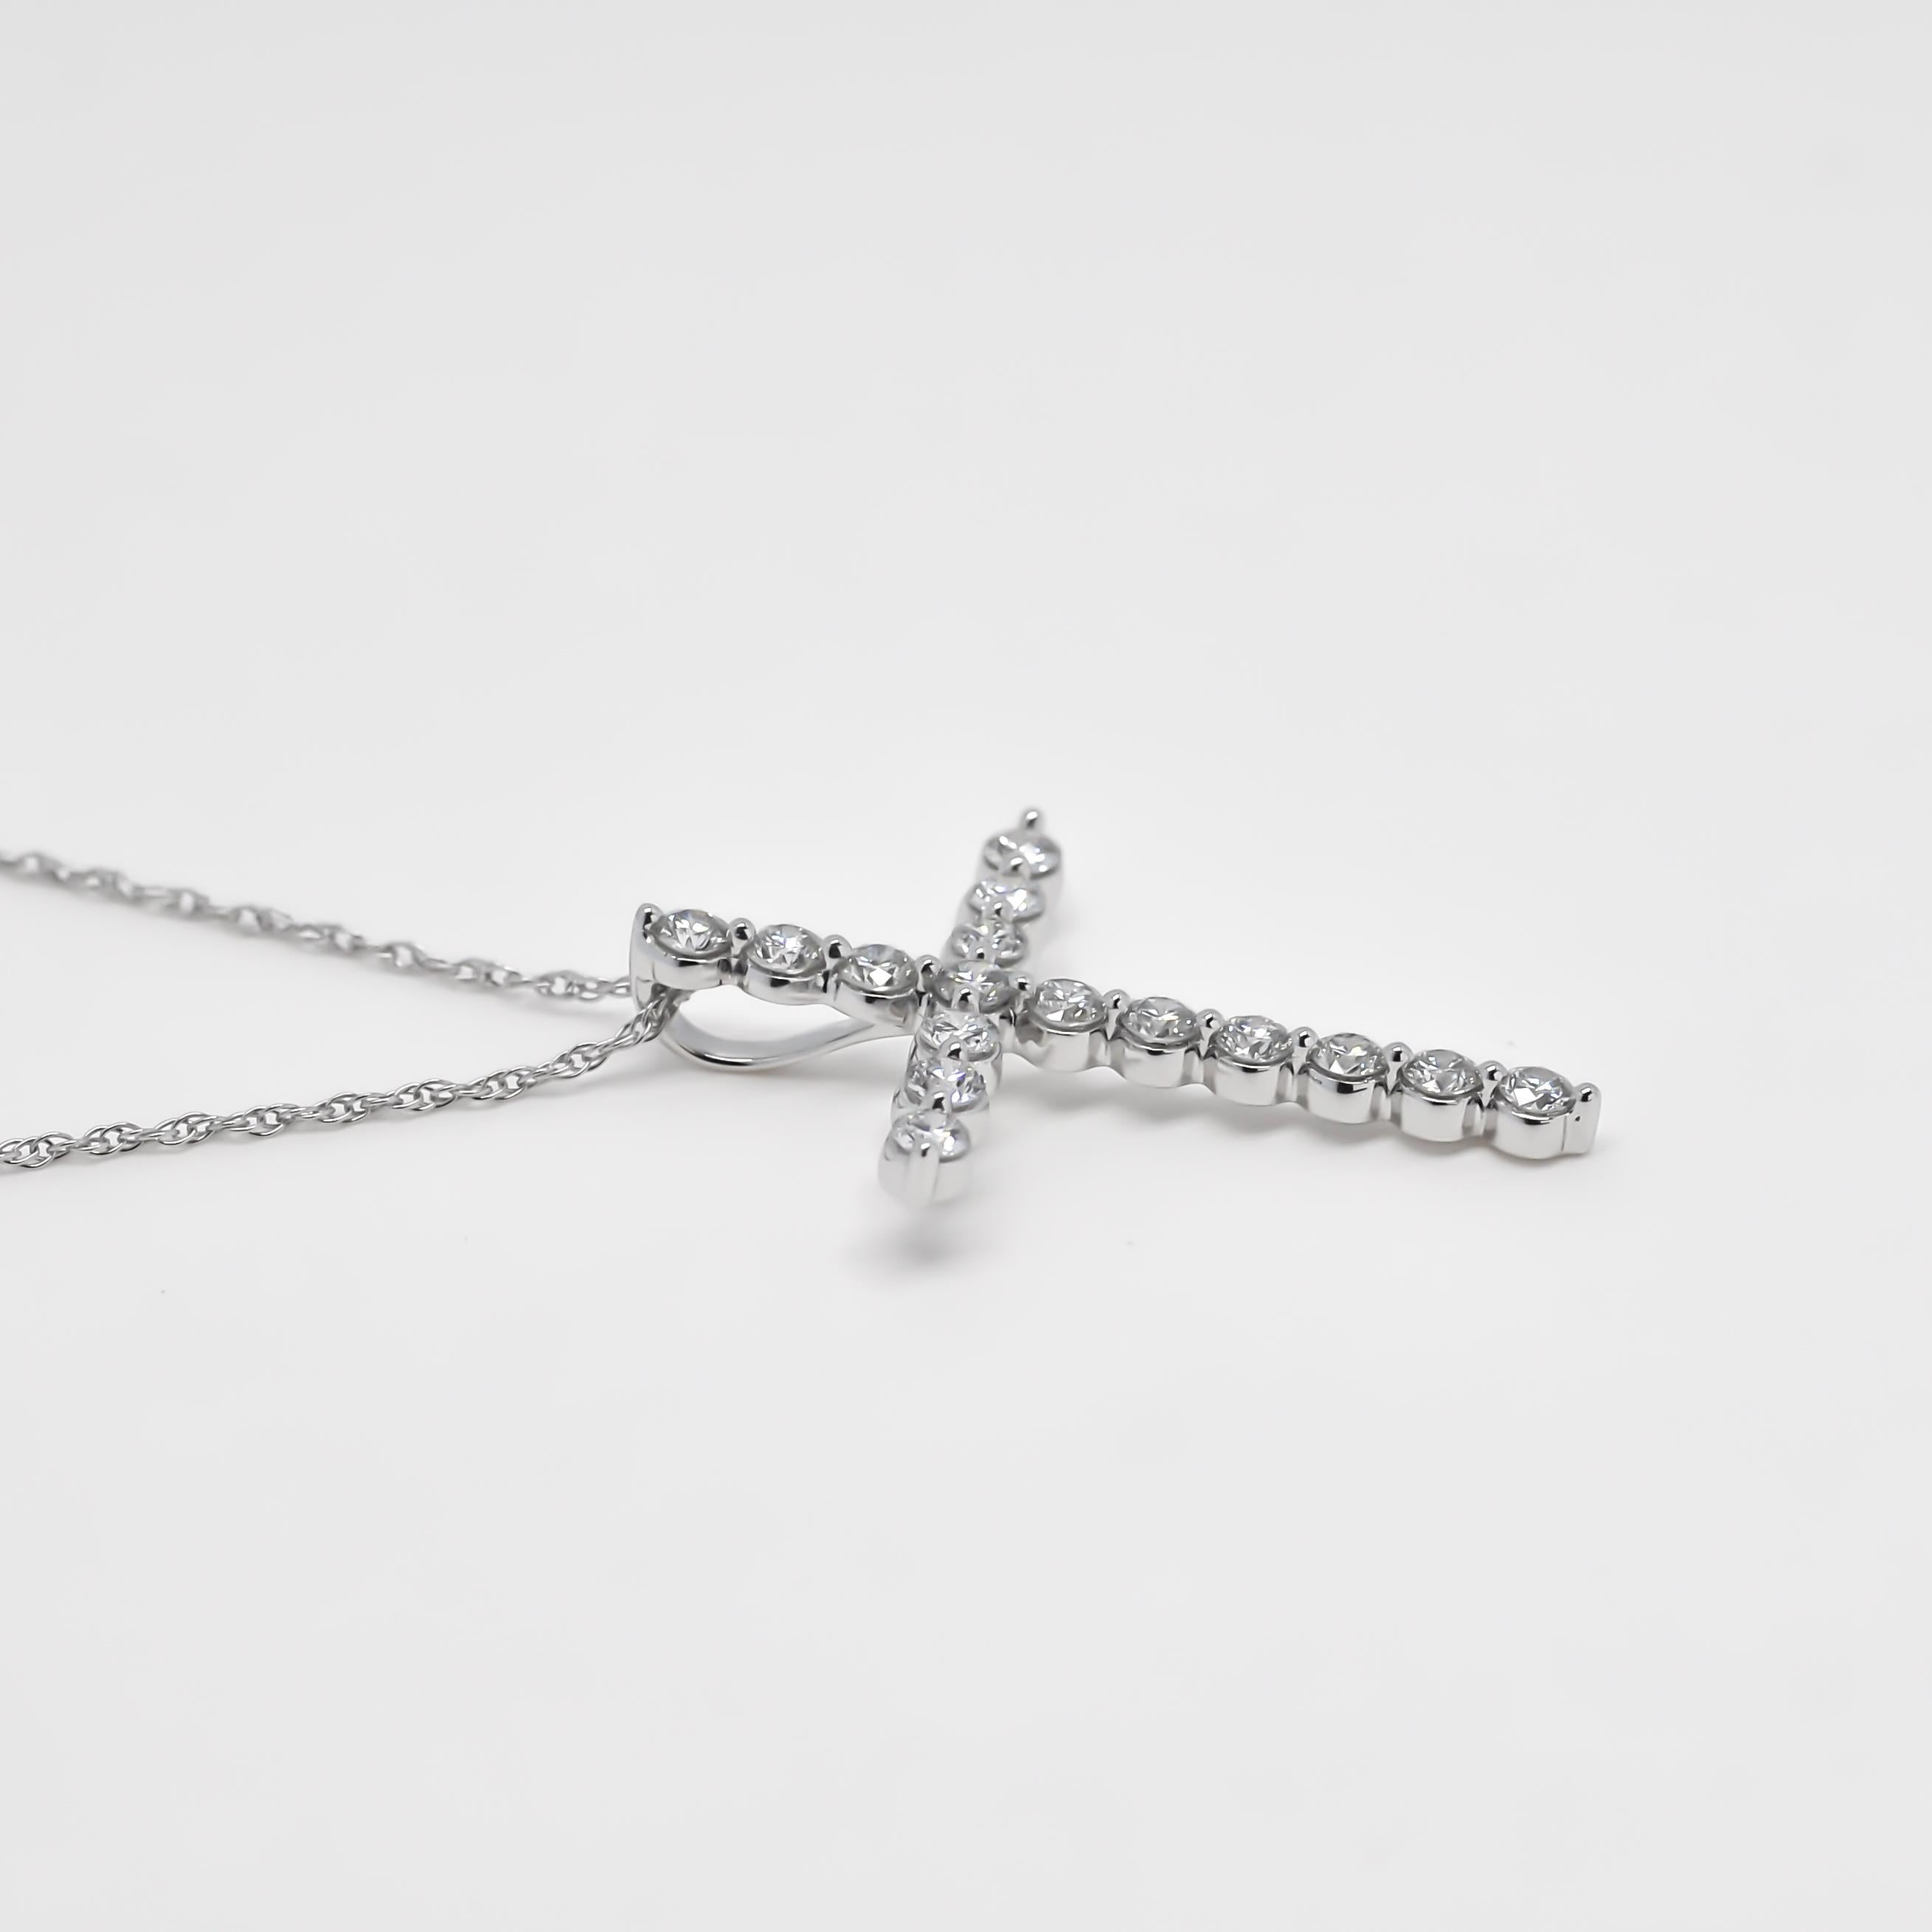 
Crafted with meticulous attention to detail, this classic cross pendant features a stunning arrangement of natural diamonds set in shared prongs. The 18KT 

This pendant showcases the beauty of simplicity, allowing the diamonds to take center